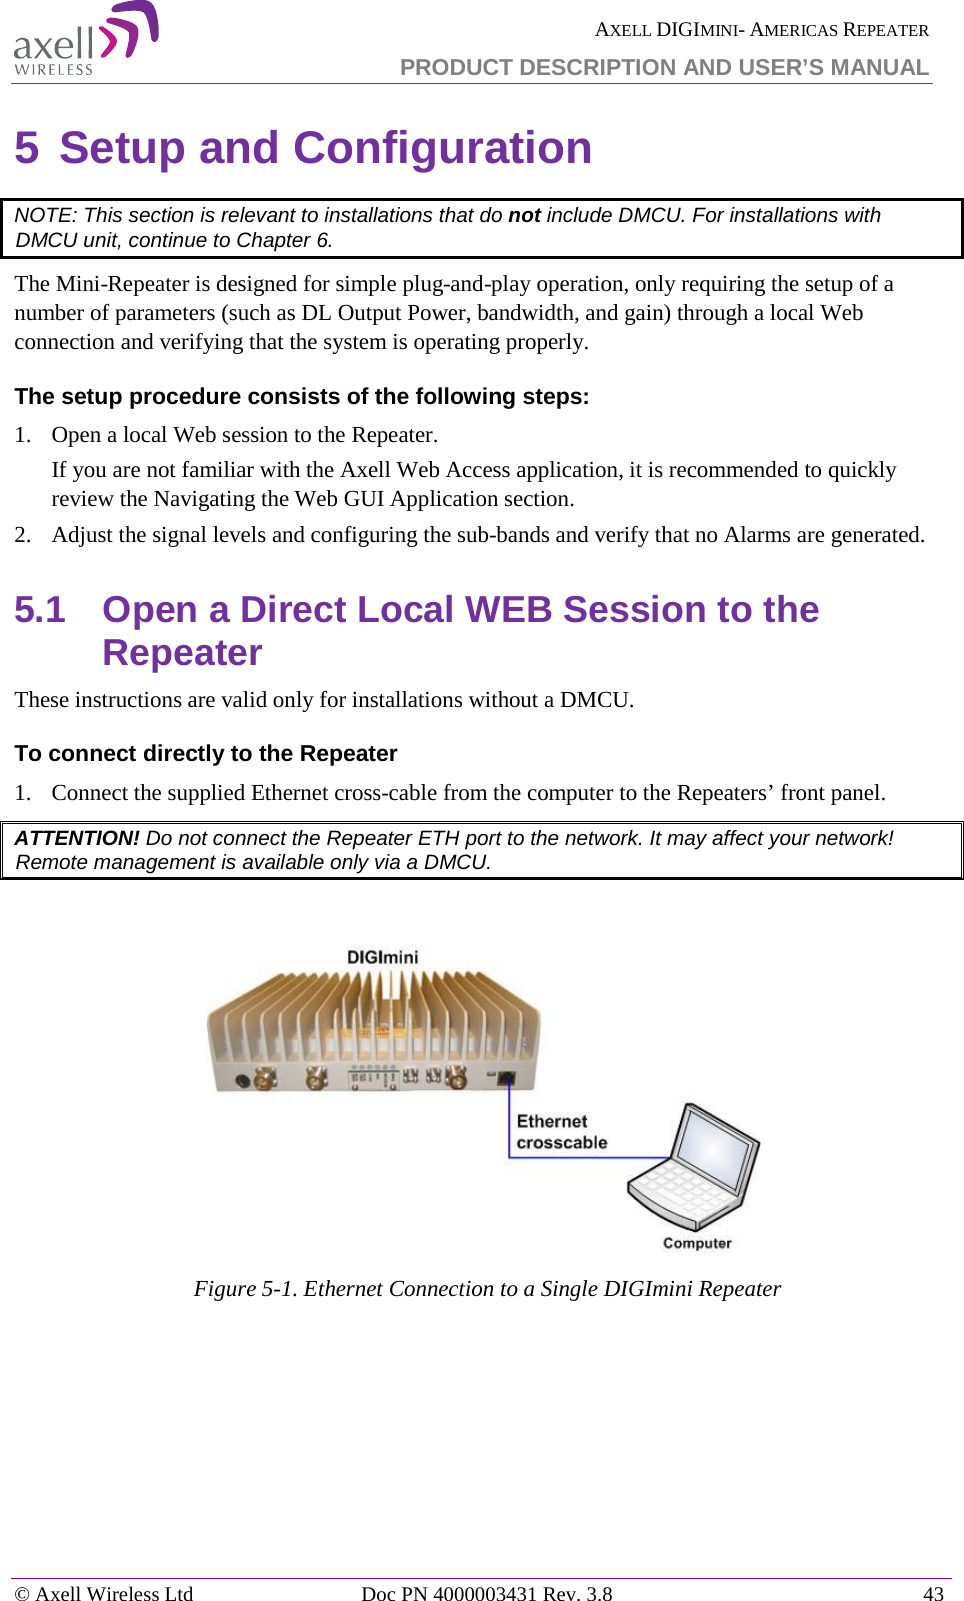  AXELL DIGIMINI- AMERICAS REPEATER PRODUCT DESCRIPTION AND USER’S MANUAL © Axell Wireless Ltd Doc PN 4000003431 Rev. 3.8 43  5 Setup and Configuration  NOTE: This section is relevant to installations that do not include DMCU. For installations with DMCU unit, continue to Chapter  6. The Mini-Repeater is designed for simple plug-and-play operation, only requiring the setup of a number of parameters (such as DL Output Power, bandwidth, and gain) through a local Web connection and verifying that the system is operating properly.  The setup procedure consists of the following steps: 1.  Open a local Web session to the Repeater.  If you are not familiar with the Axell Web Access application, it is recommended to quickly review the Navigating the Web GUI Application section. 2.  Adjust the signal levels and configuring the sub-bands and verify that no Alarms are generated. 5.1  Open a Direct Local WEB Session to the Repeater These instructions are valid only for installations without a DMCU.  To connect directly to the Repeater   1.  Connect the supplied Ethernet cross-cable from the computer to the Repeaters’ front panel. ATTENTION! Do not connect the Repeater ETH port to the network. It may affect your network! Remote management is available only via a DMCU.    Figure  5-1. Ethernet Connection to a Single DIGImini Repeater    